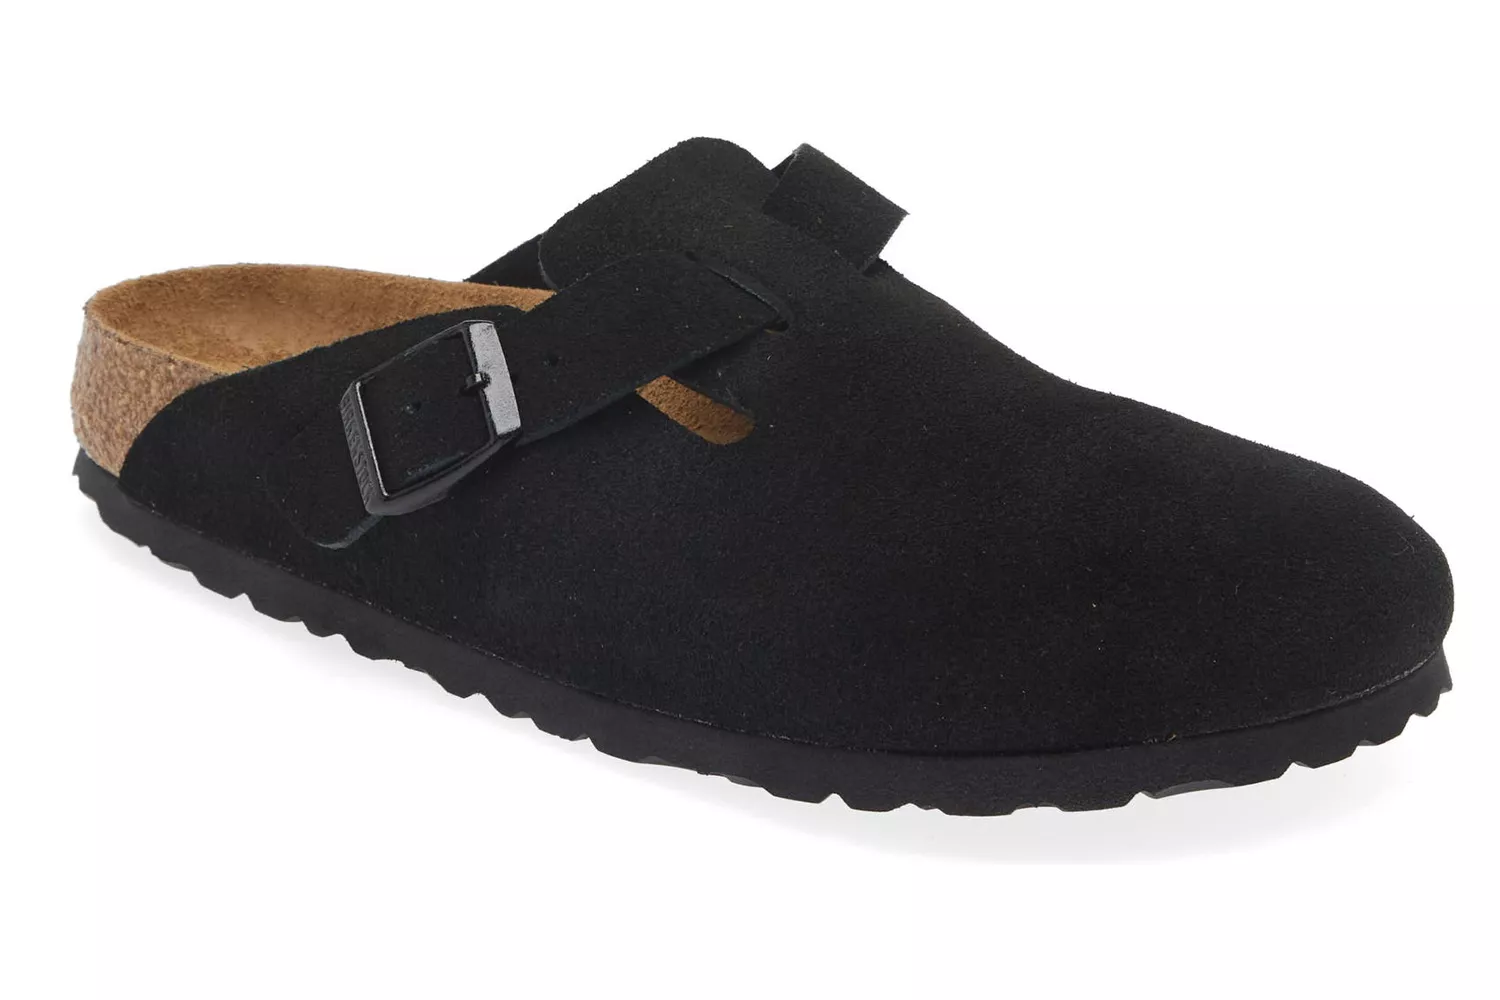 The Most Comfortable Clogs: Birkenstock Womens Boston Soft Footbed Clog